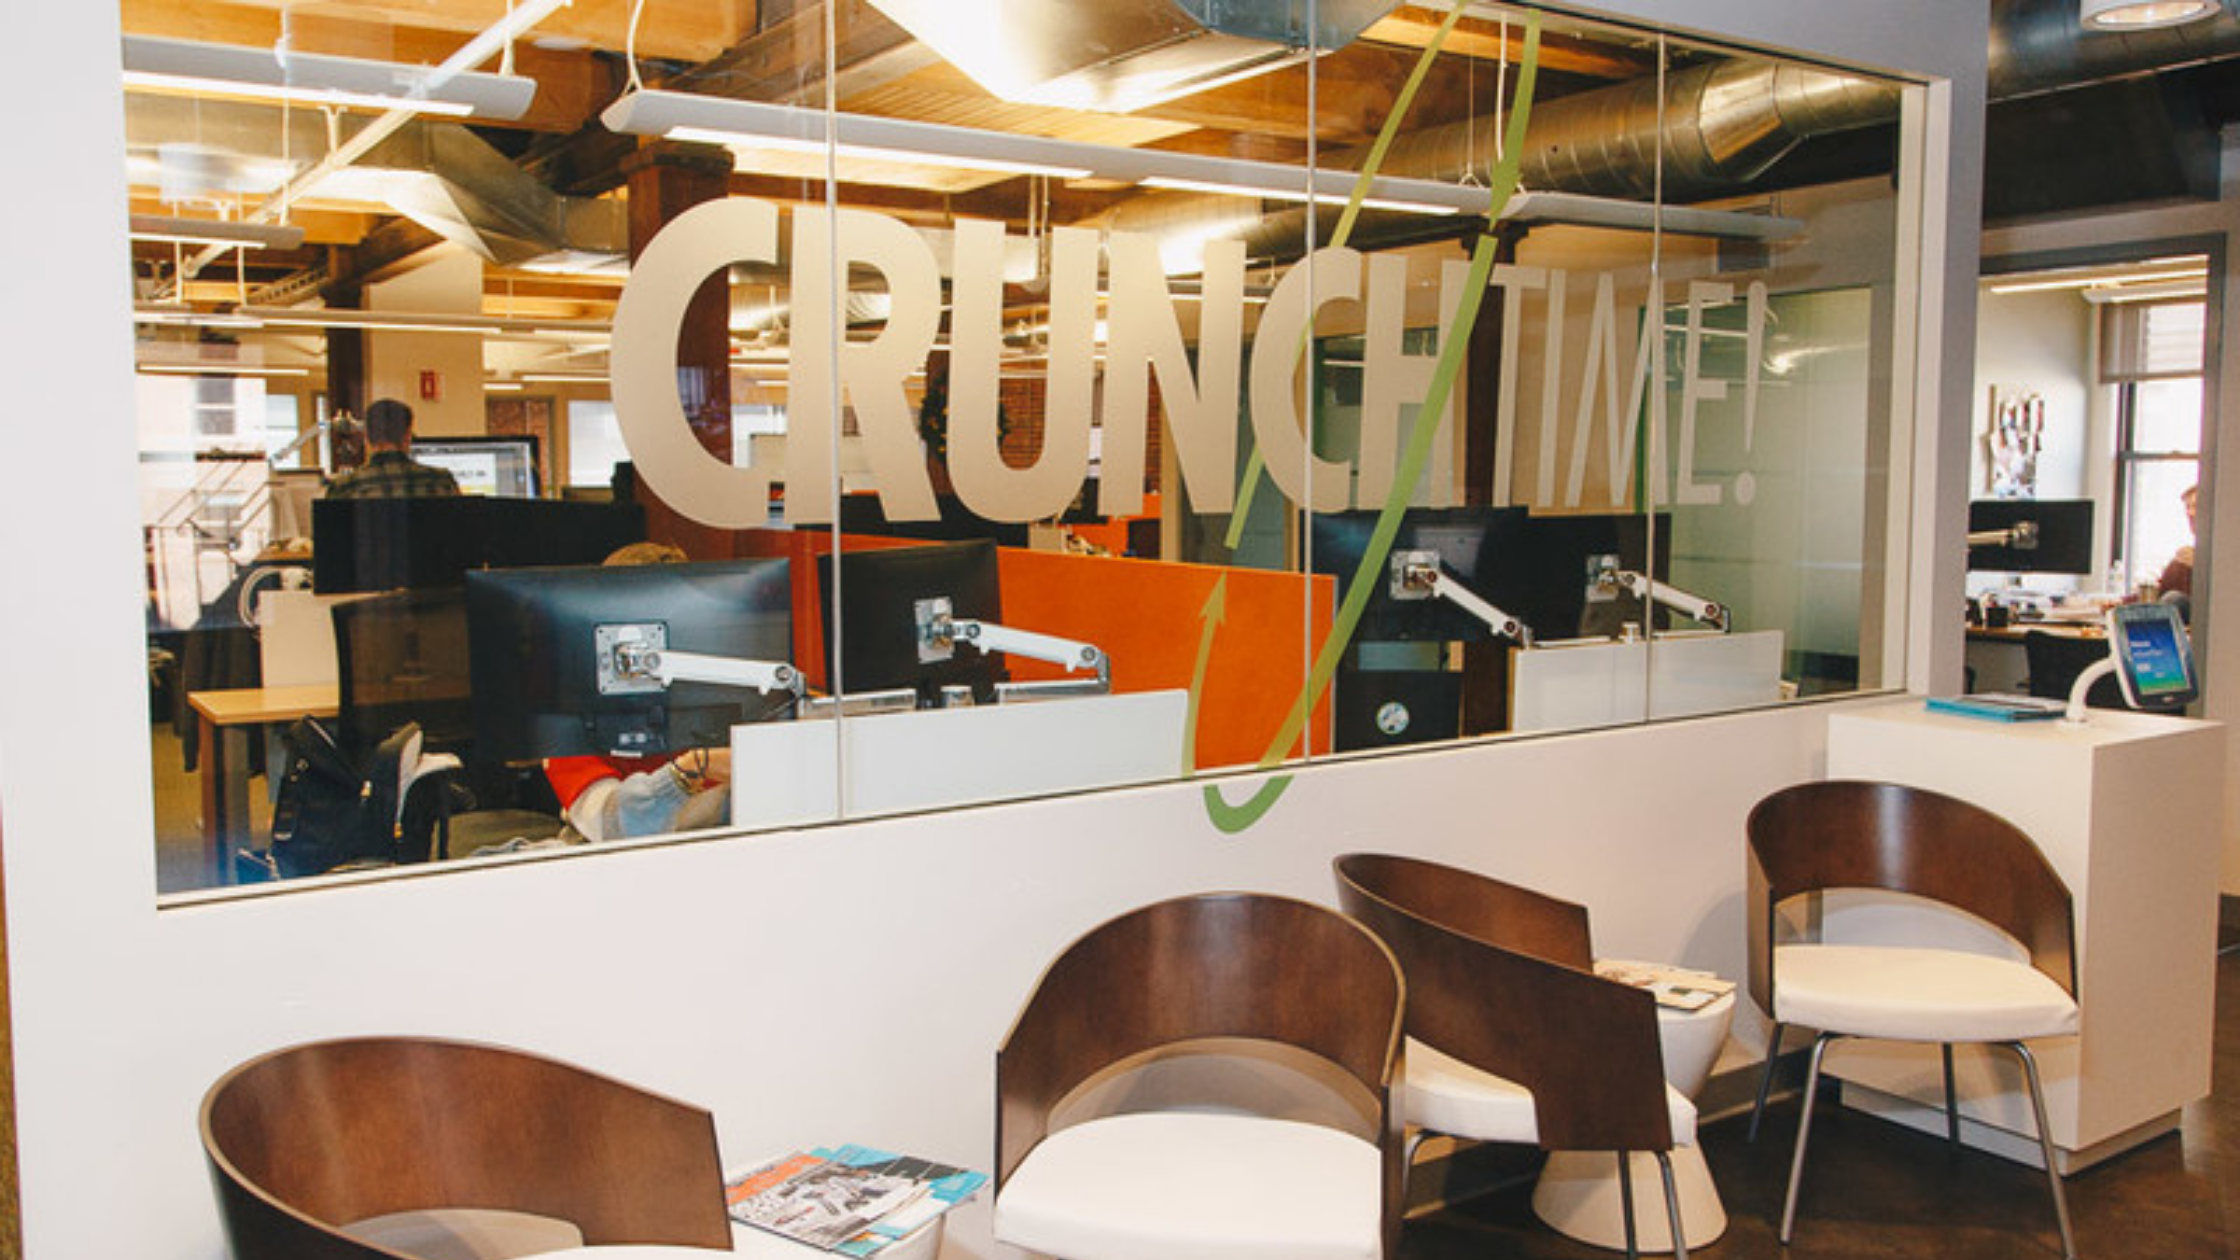 Q&A with Ted Ruscitti, CrunchTime's Chief Experience Officer